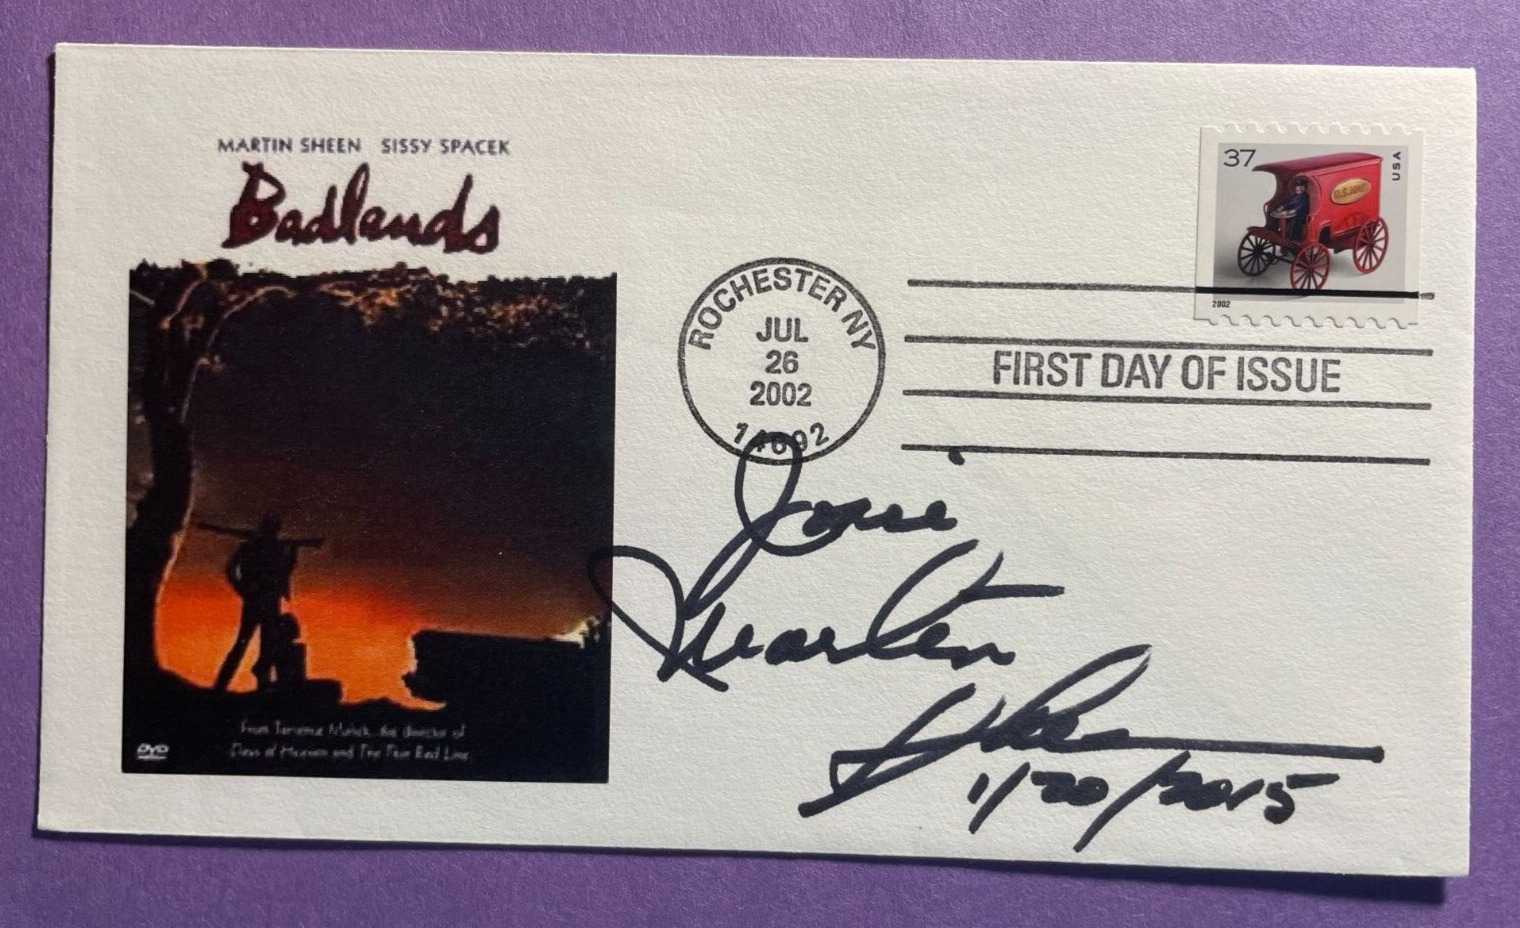 SIGNED MARTIN SHEEN FDC AUTOGRAPHED FIRST DAY COVER - BADLANDS